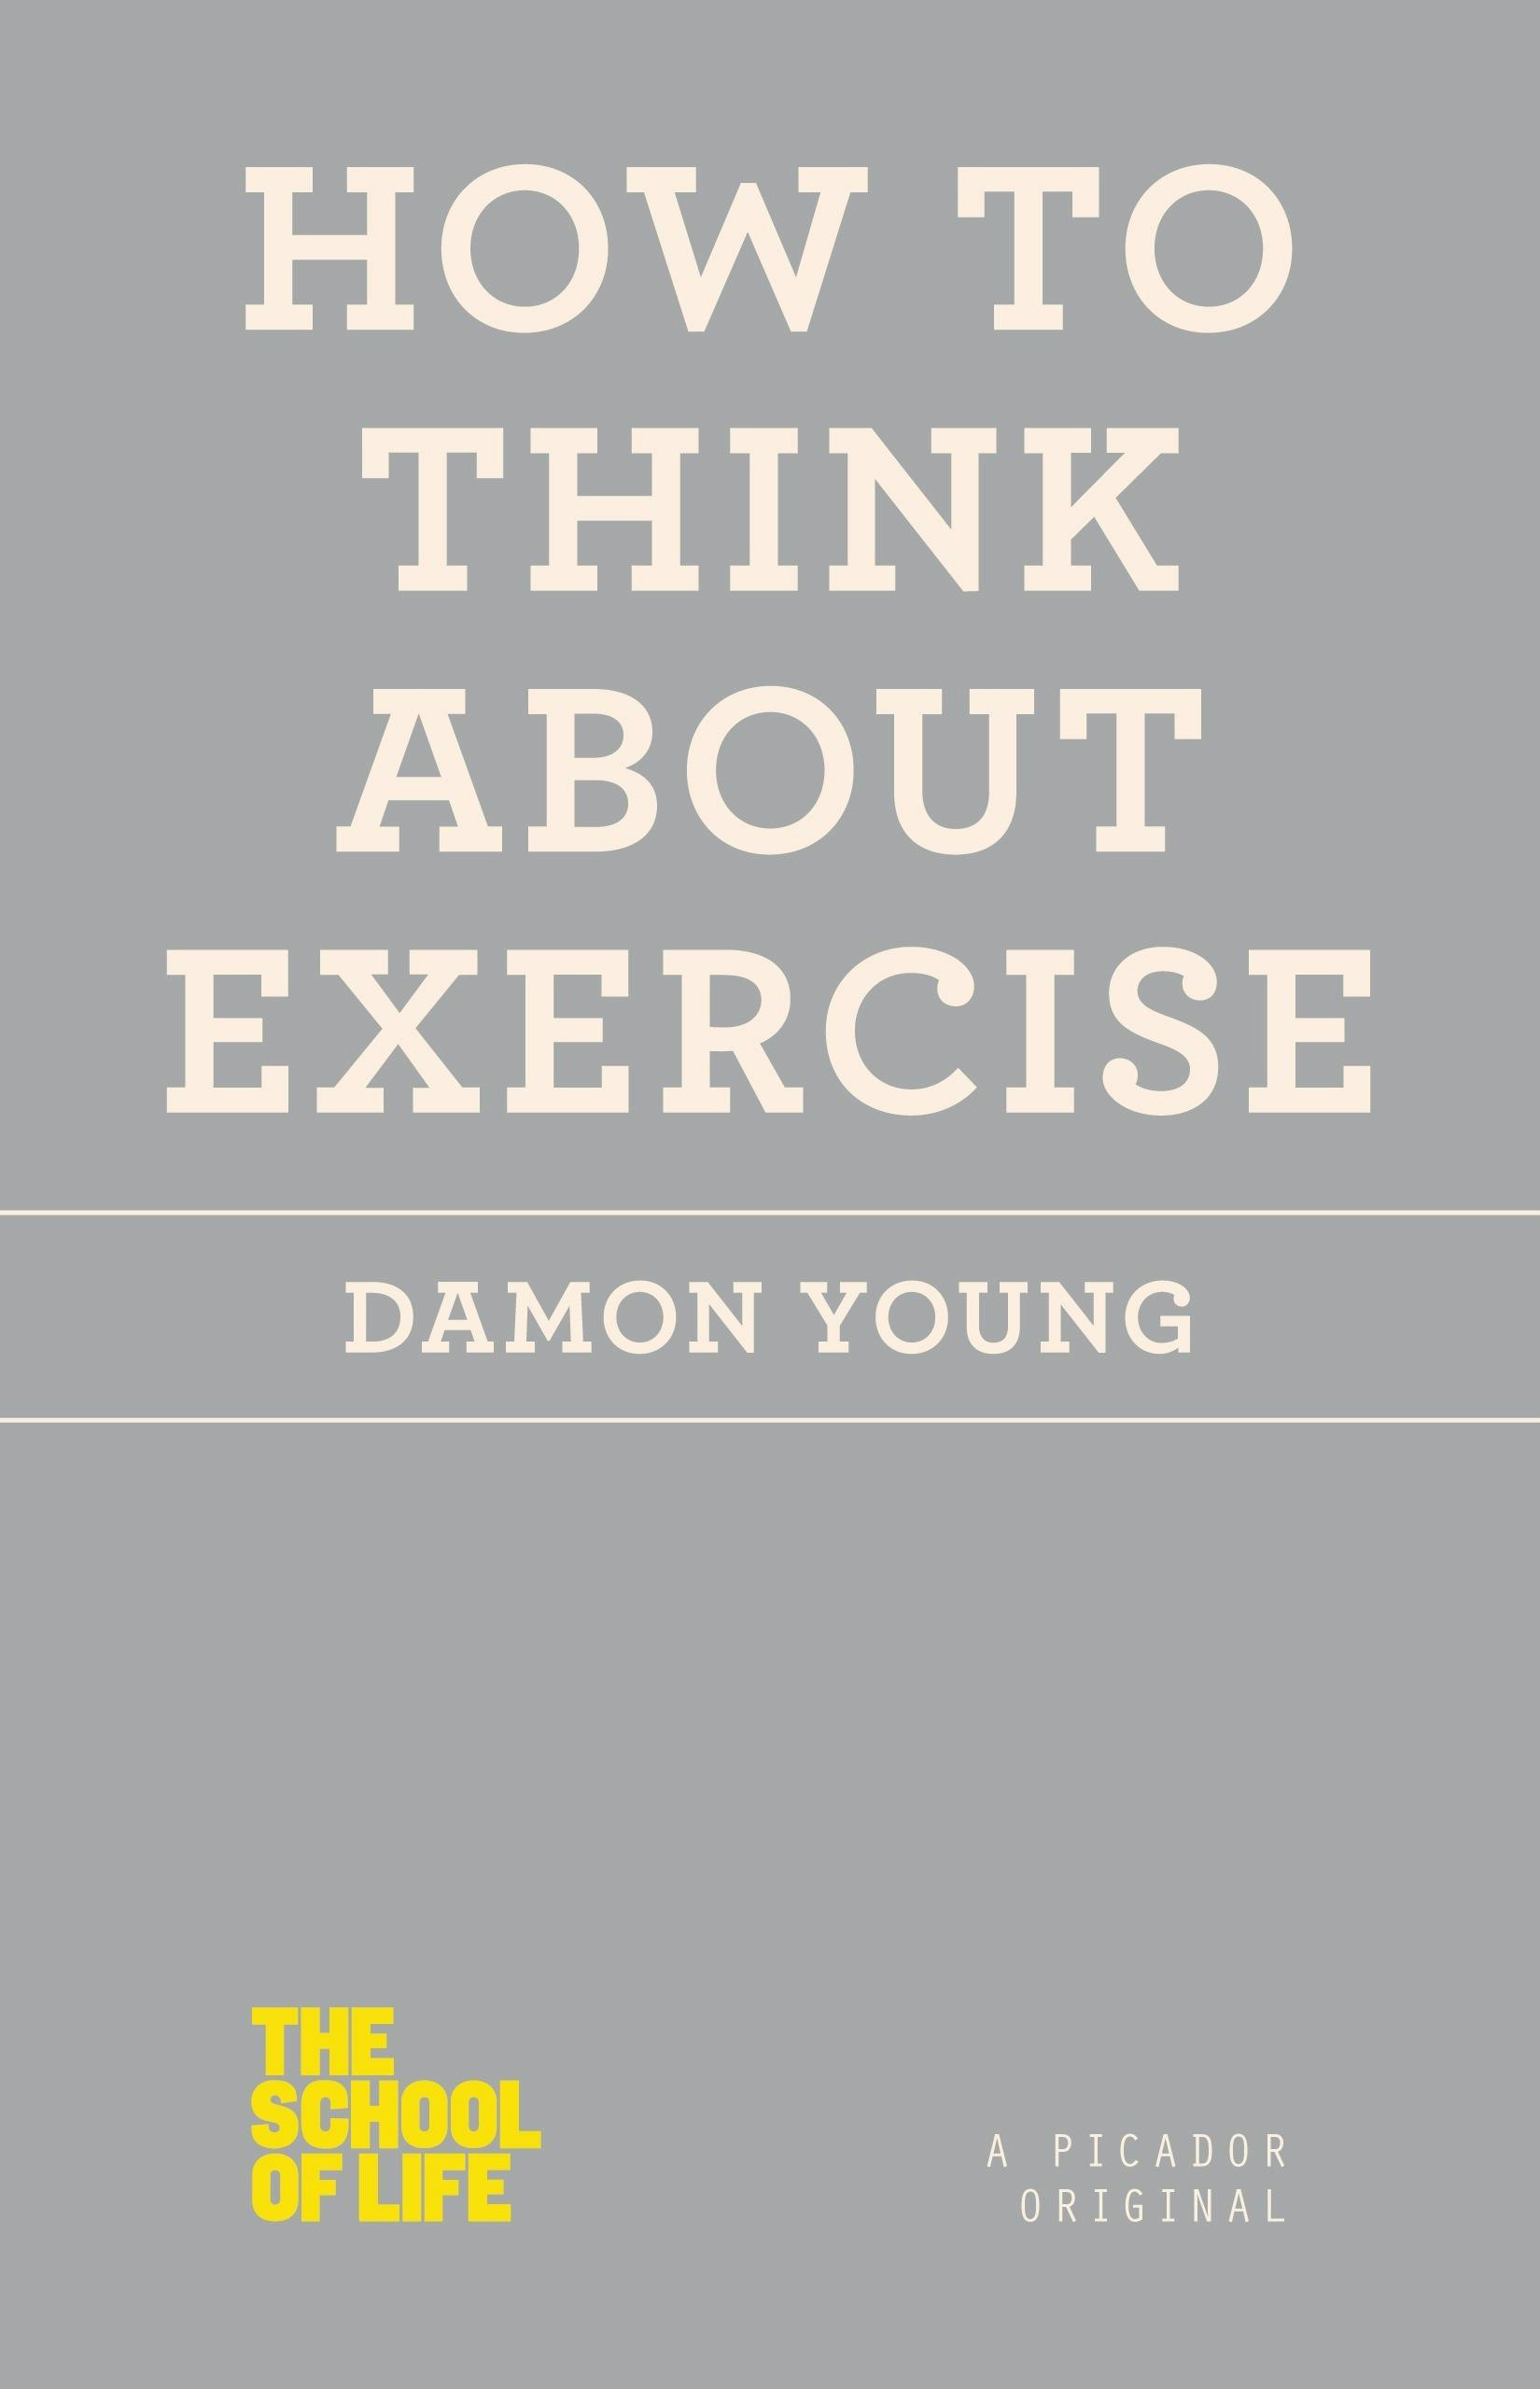 Image of How to Think About Exercise